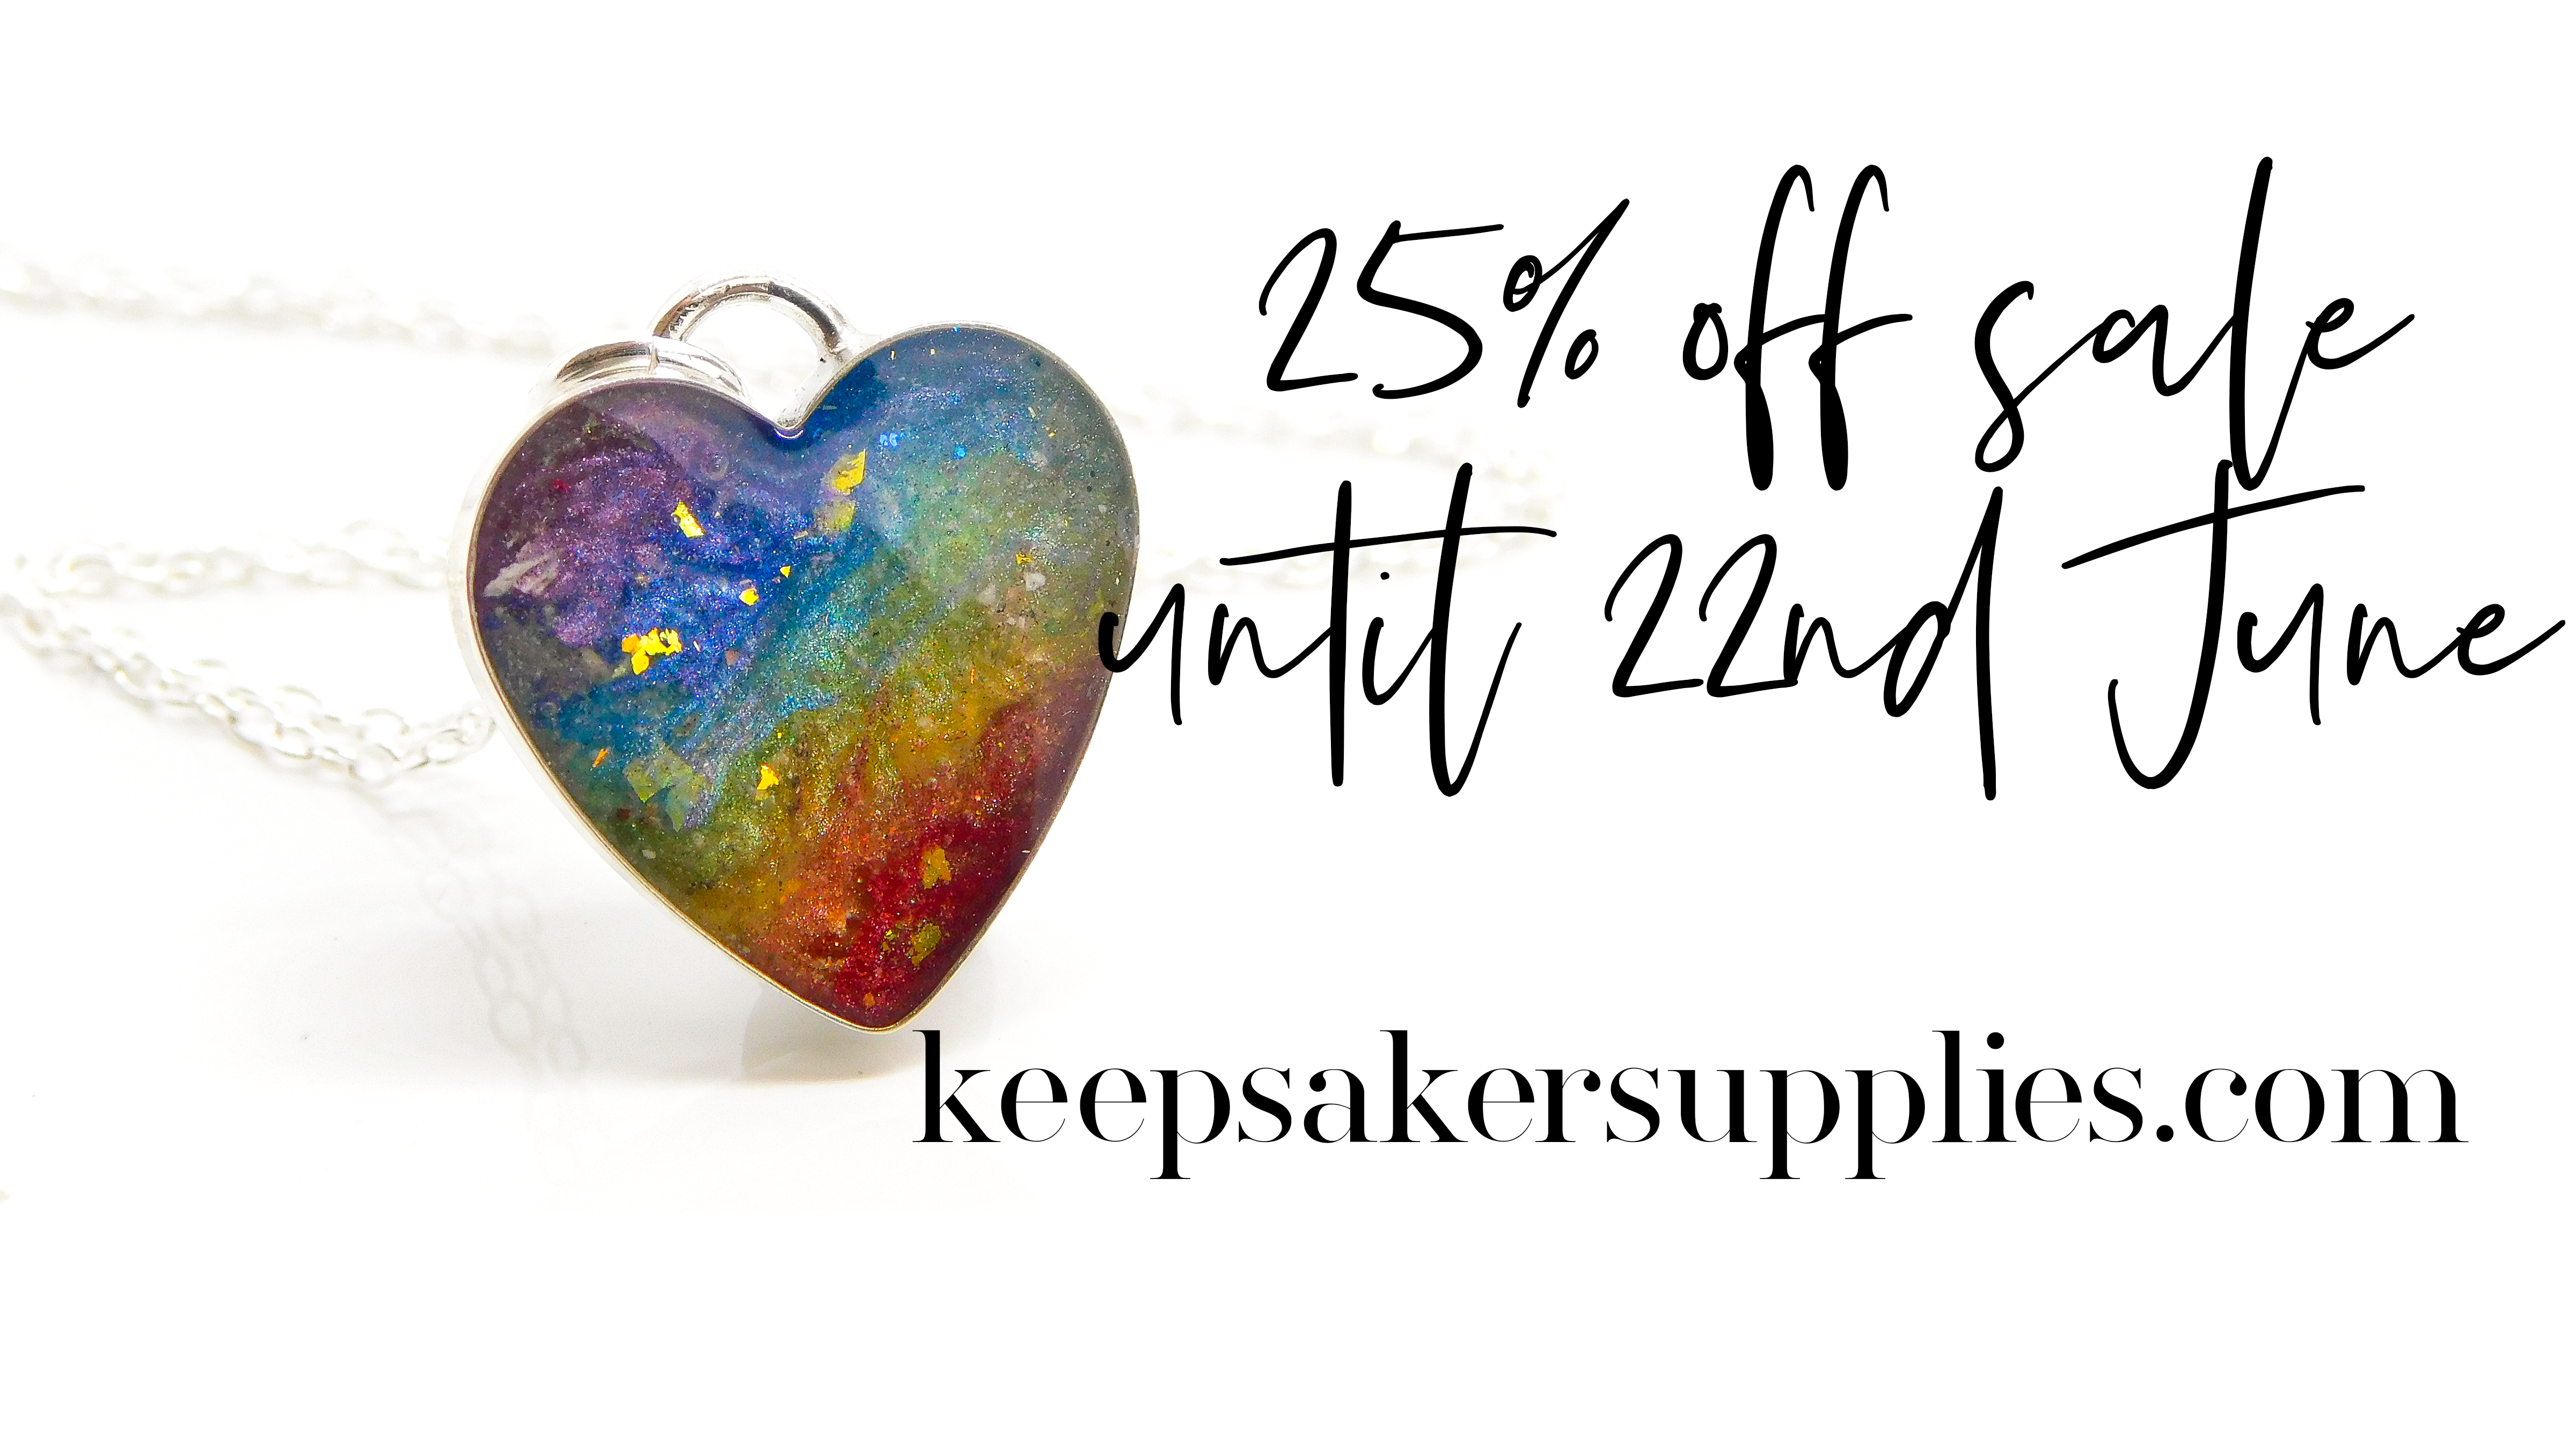 25% off sale until 22nd June 2023, free shipping on all orders over £50 including international orders